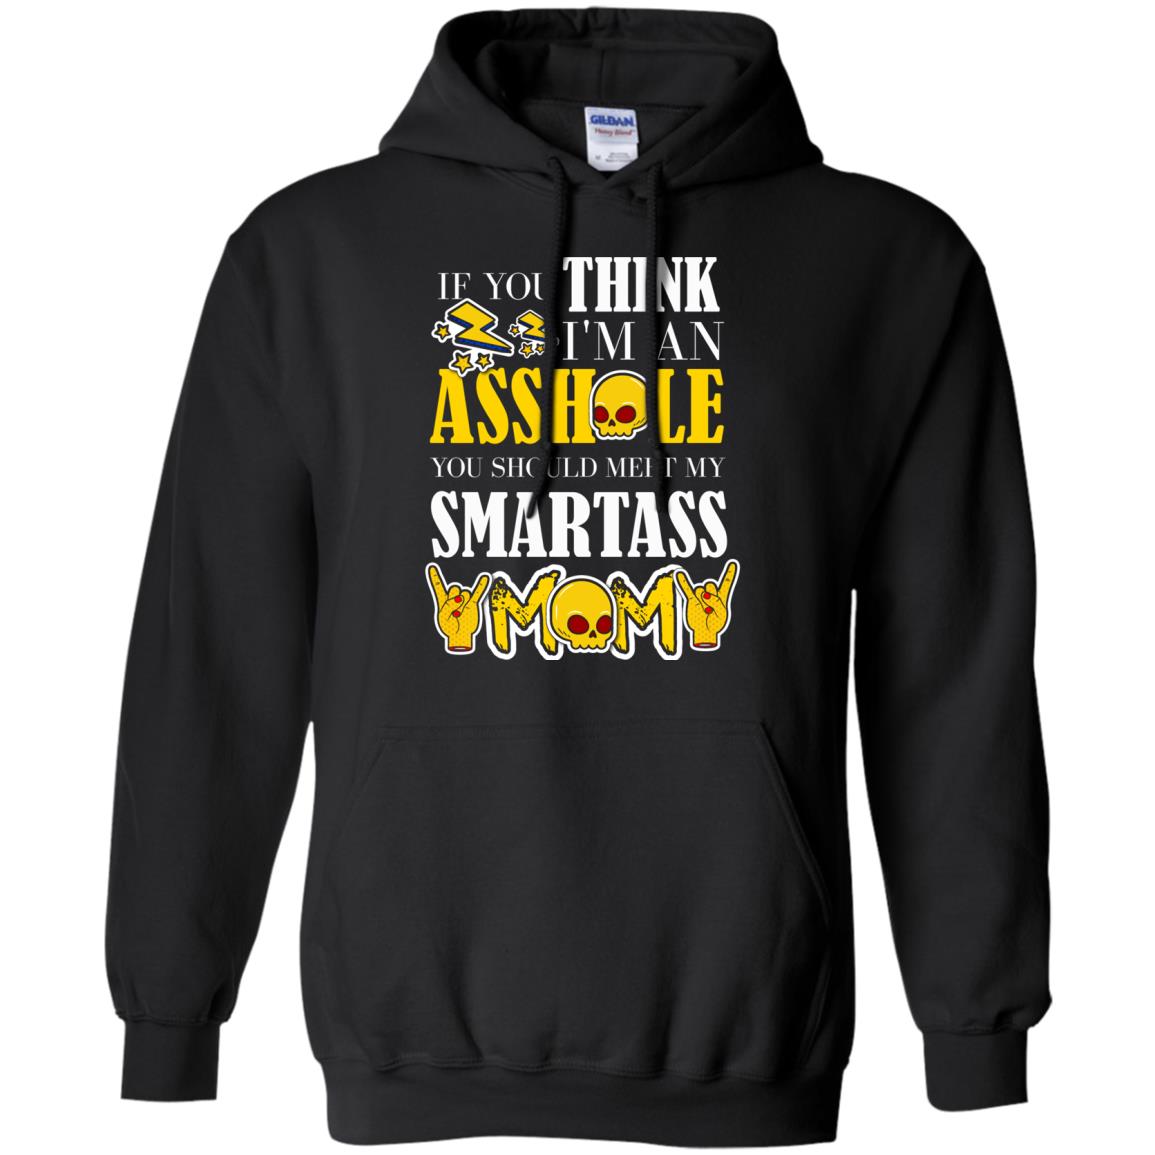 If You Think I_m An Asshole You Should Meet My Smartass Mom Shirt For Daugher Or SonG185 Gildan Pullover Hoodie 8 oz.